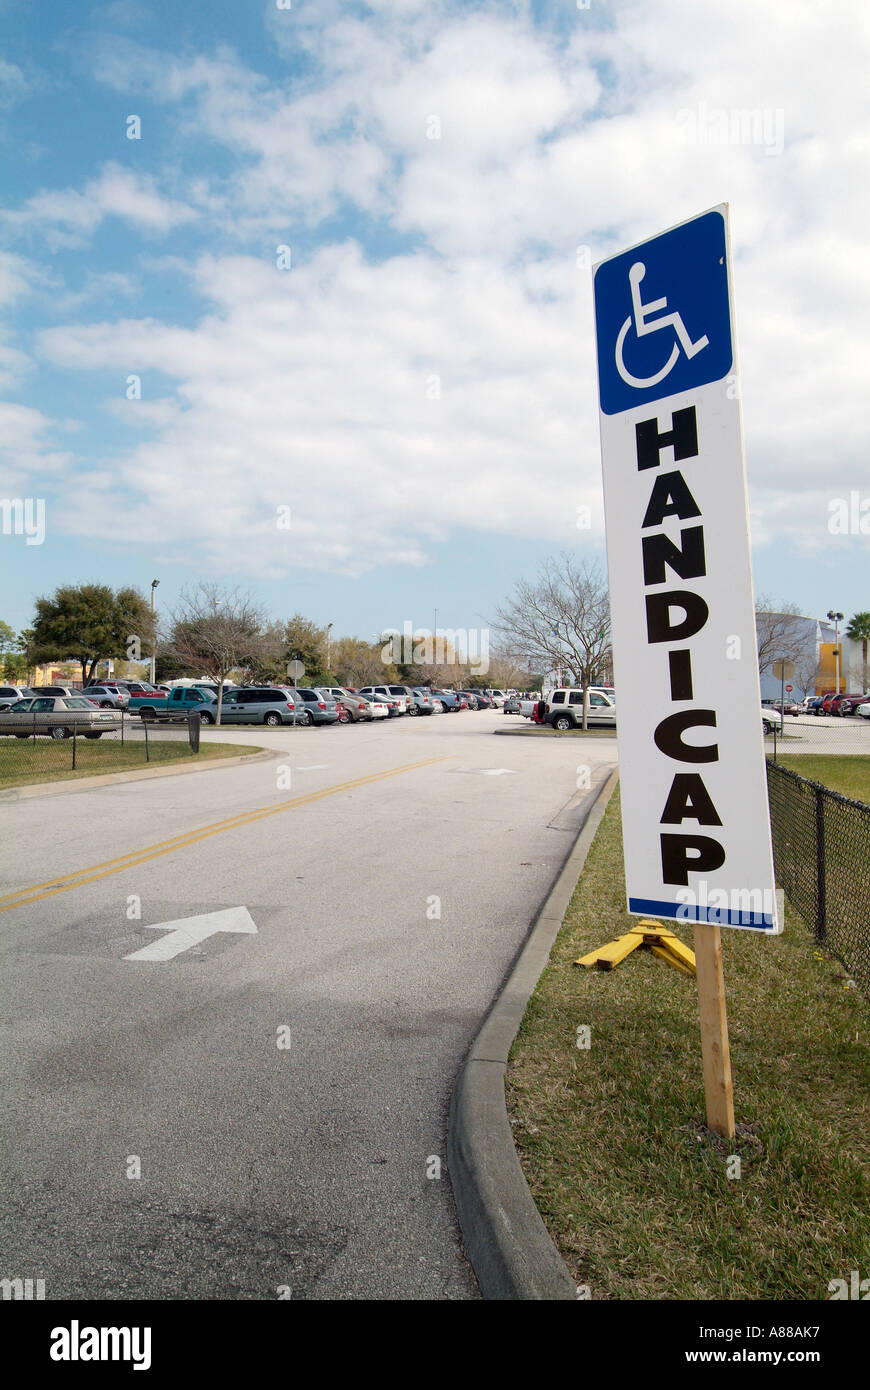 Handicapped parking lot devoted entirely to handicapped drivers at the Daytona International Speedway Daytona Beach Florida Stock Photo